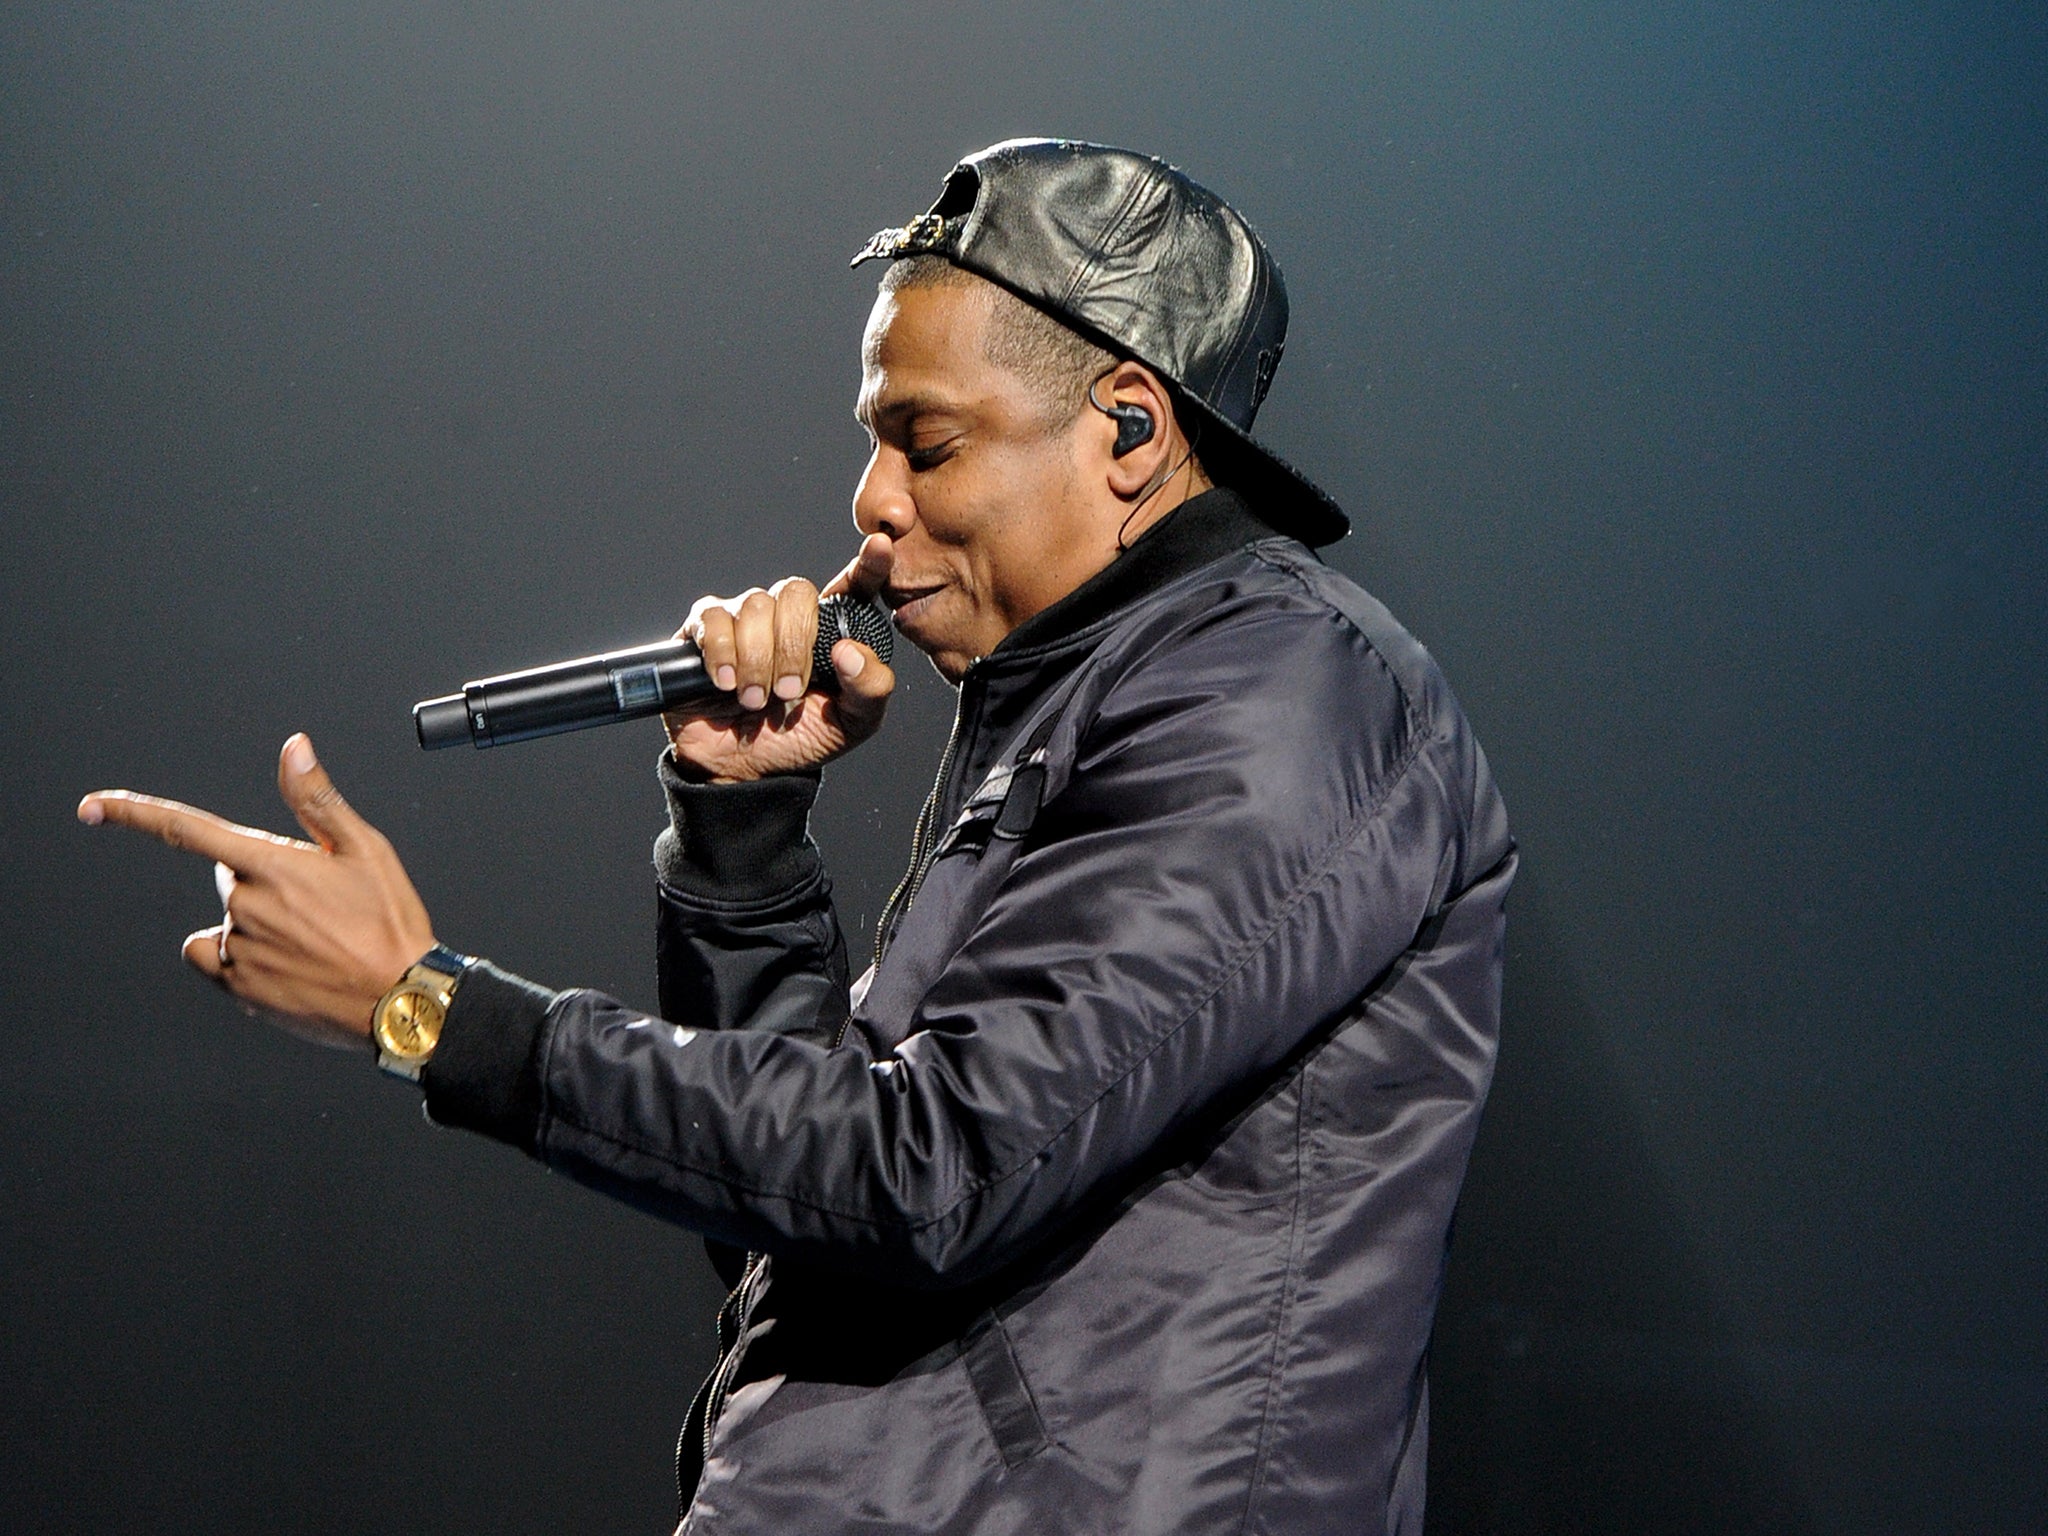 Jay Z also shared an open letter expressing his anger and sadness at the continued police brutality